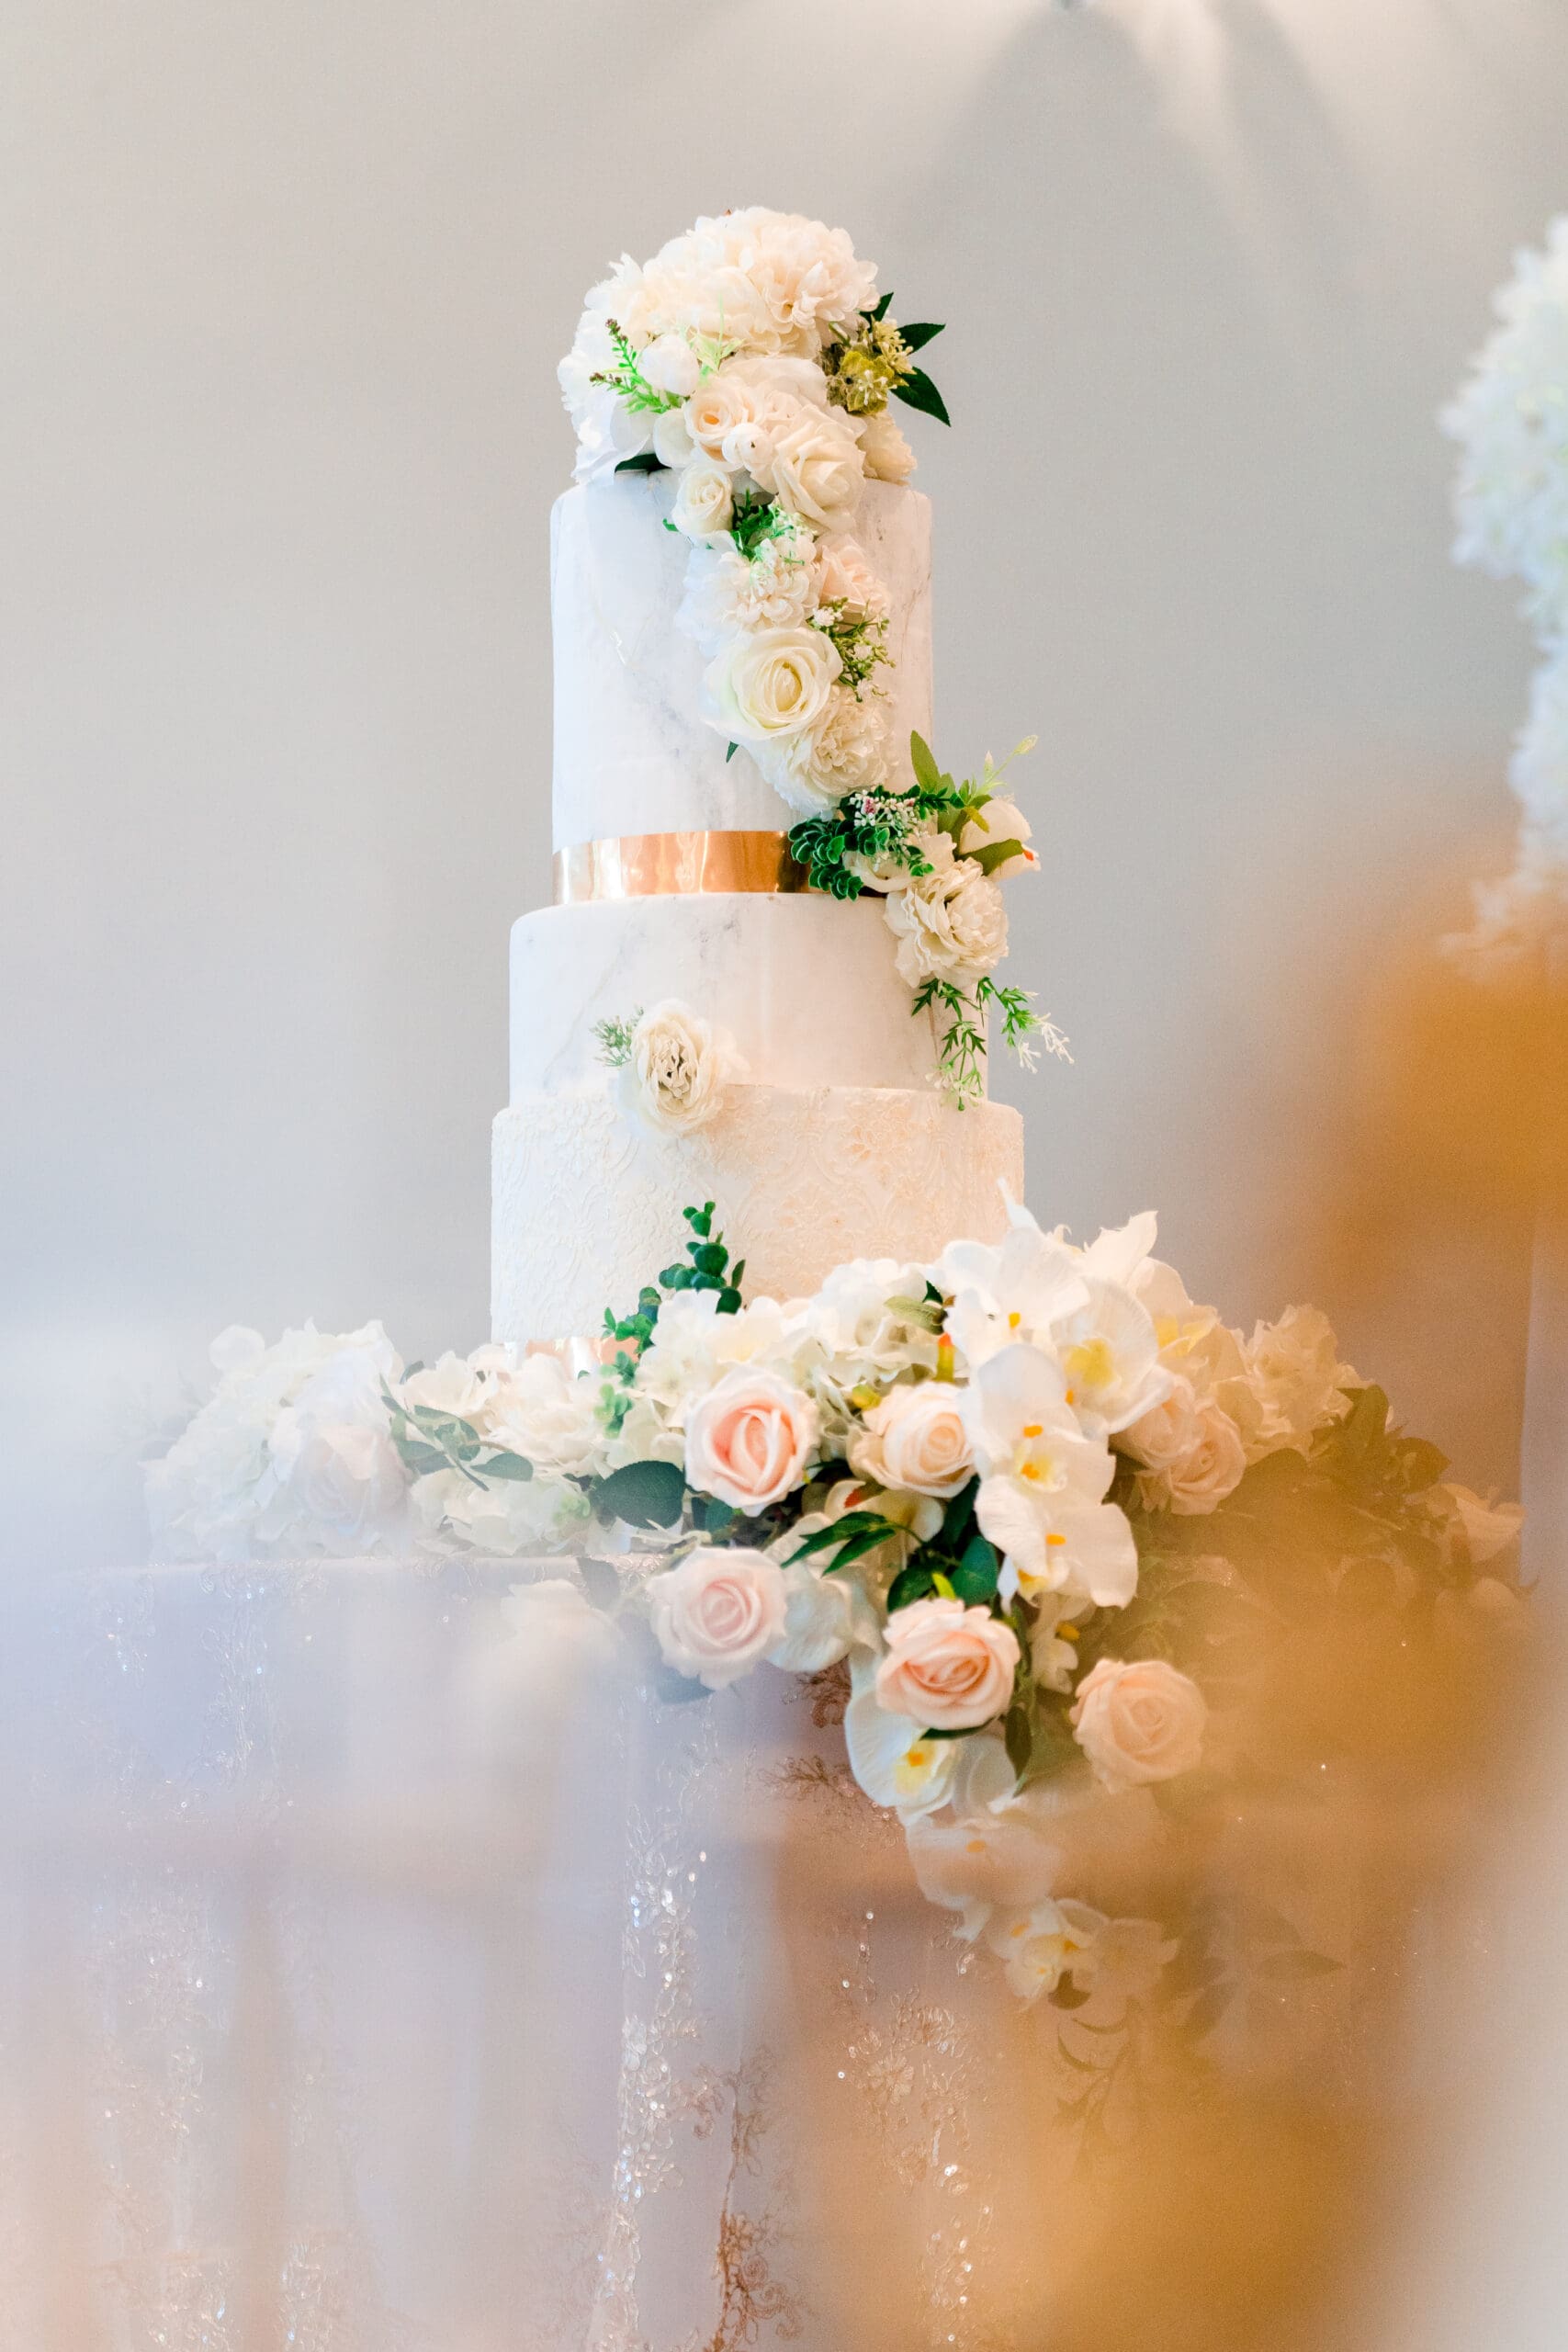 Four-tier wedding cake adorned with real and edible flowers